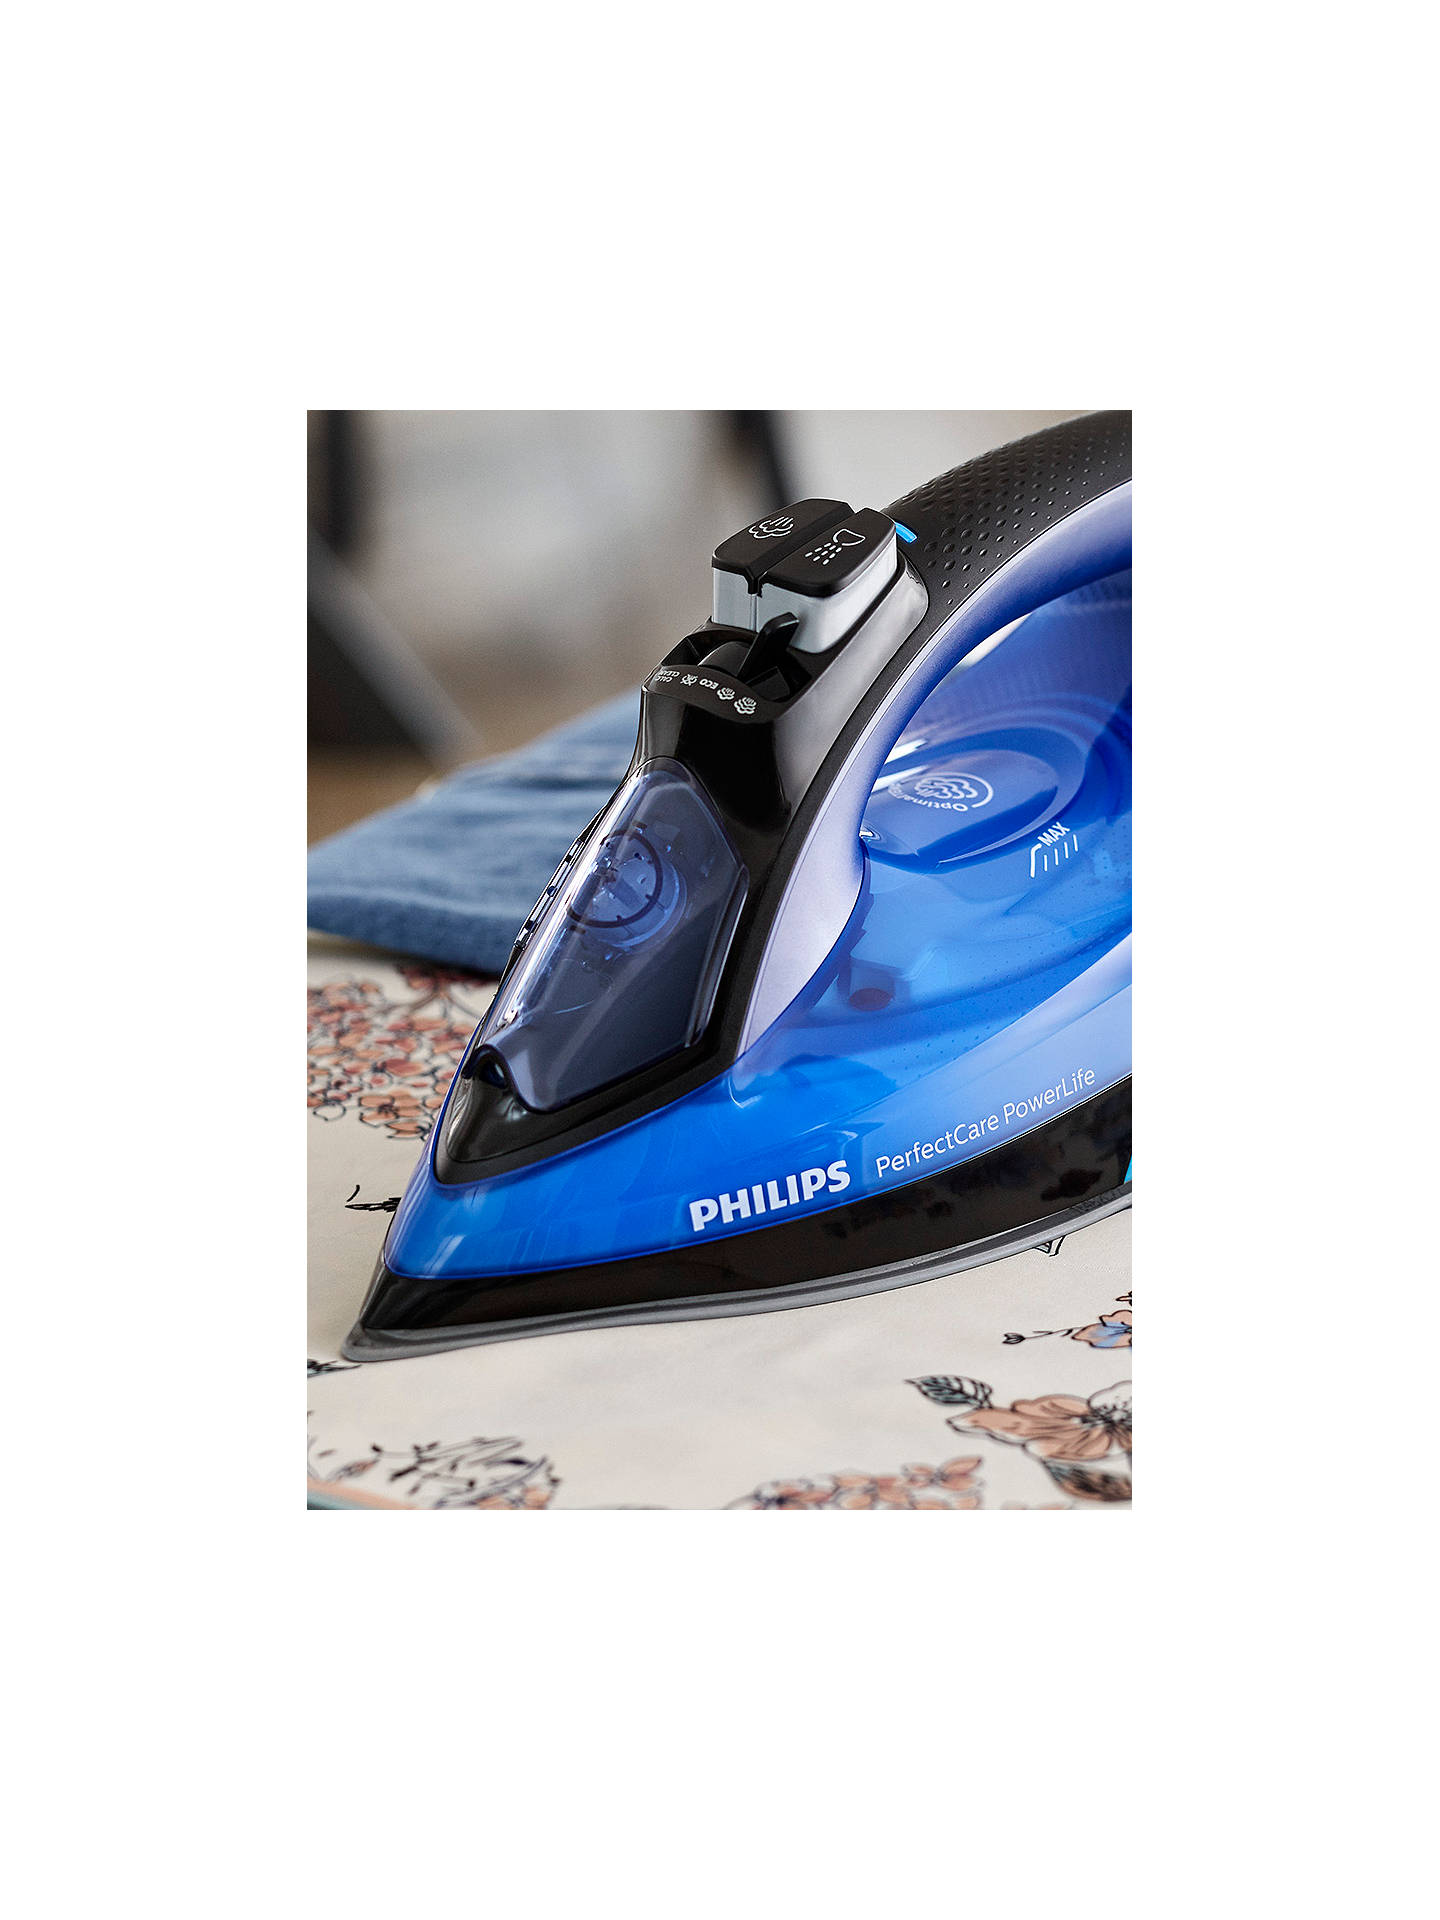 Philips PerfectCare PowerLife Steam Iron GC3920//26 with up to 180g Steam Boost /& No Fabric Burns Technology